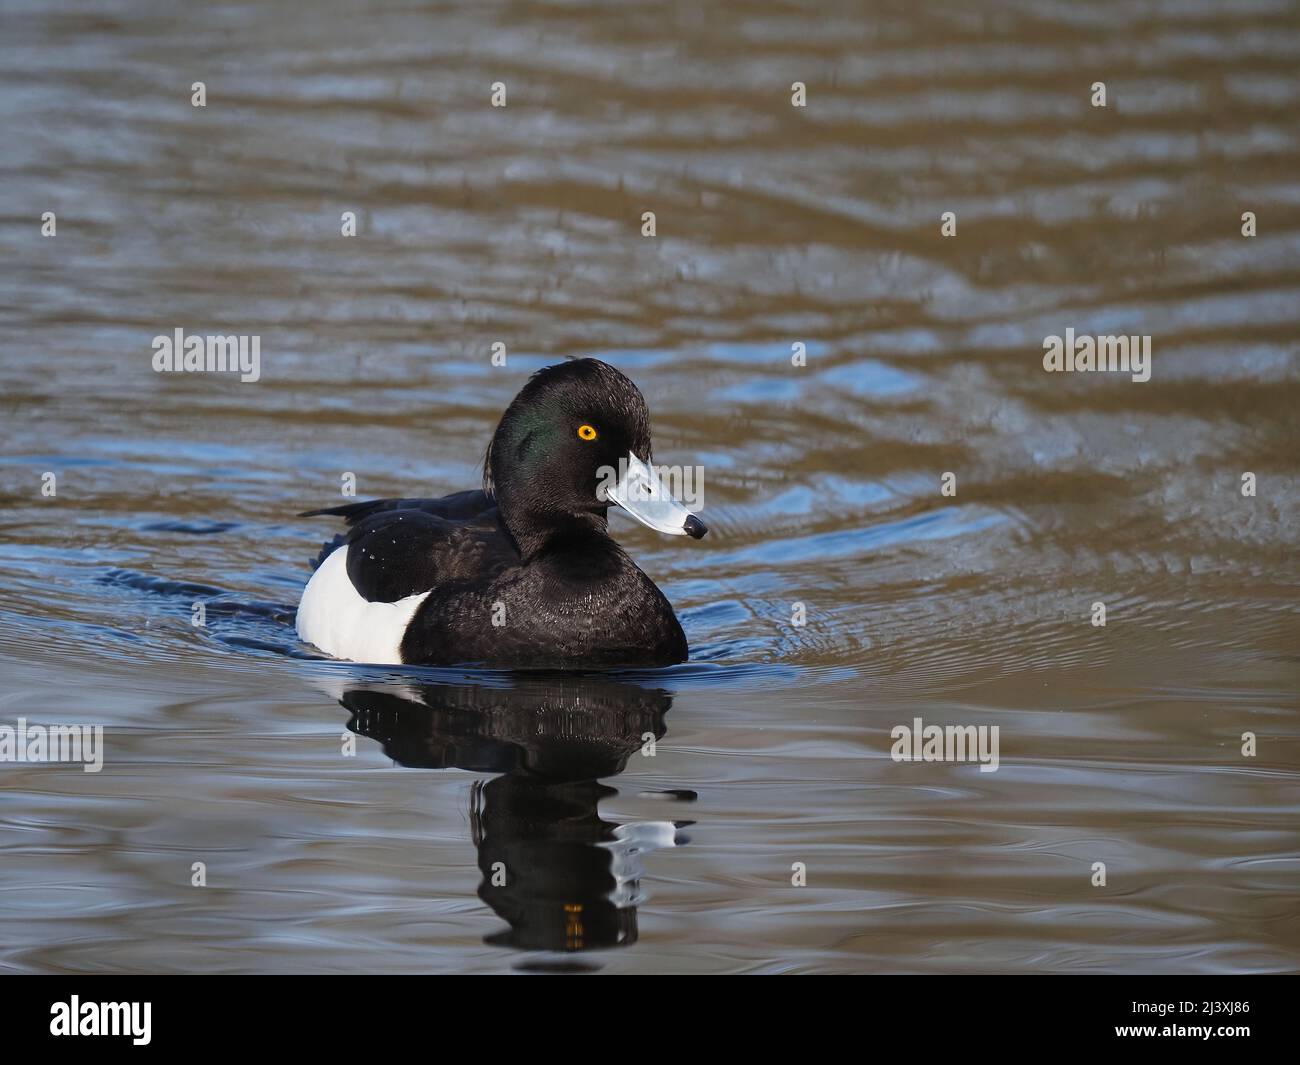 Tufted duck on a lake near Warrington.  This pair appeared to have bonded prior to a breeding attempt. Stock Photo